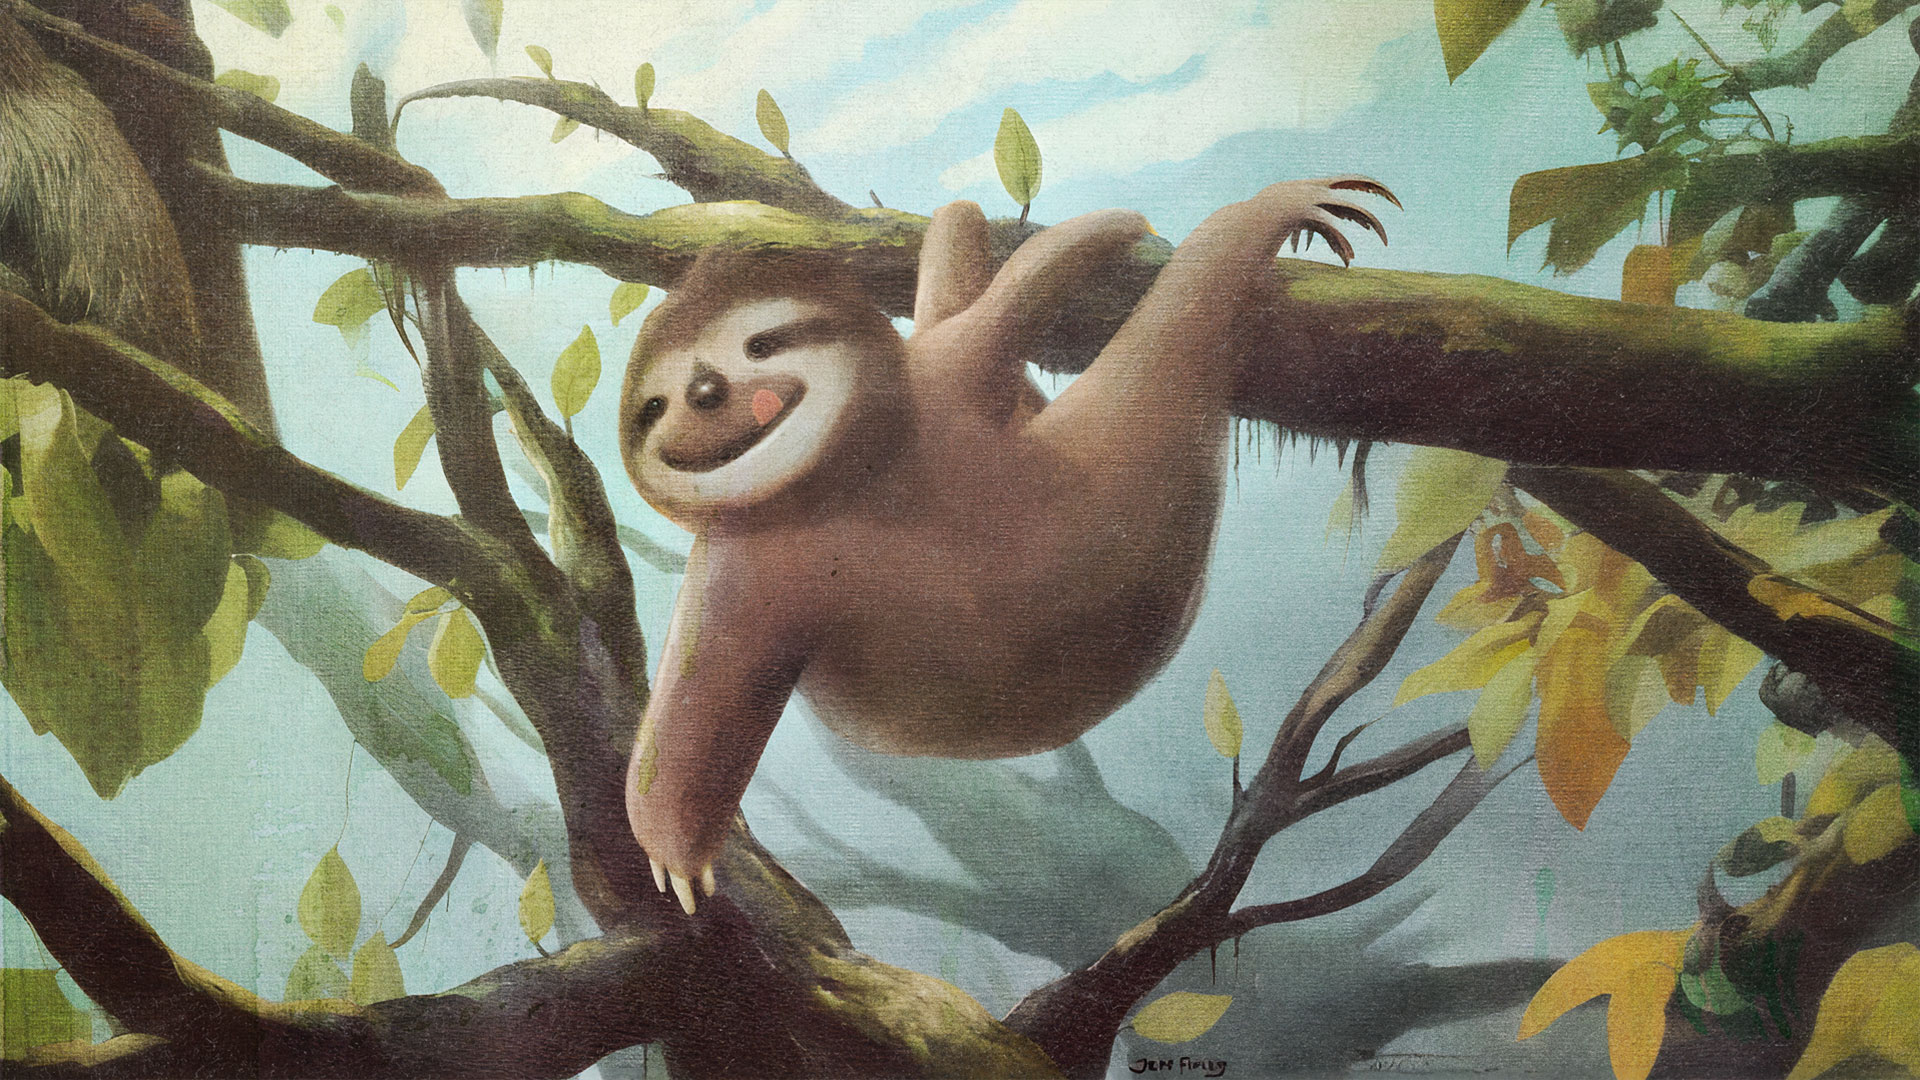 Just a Sloth on a Mystical Journey